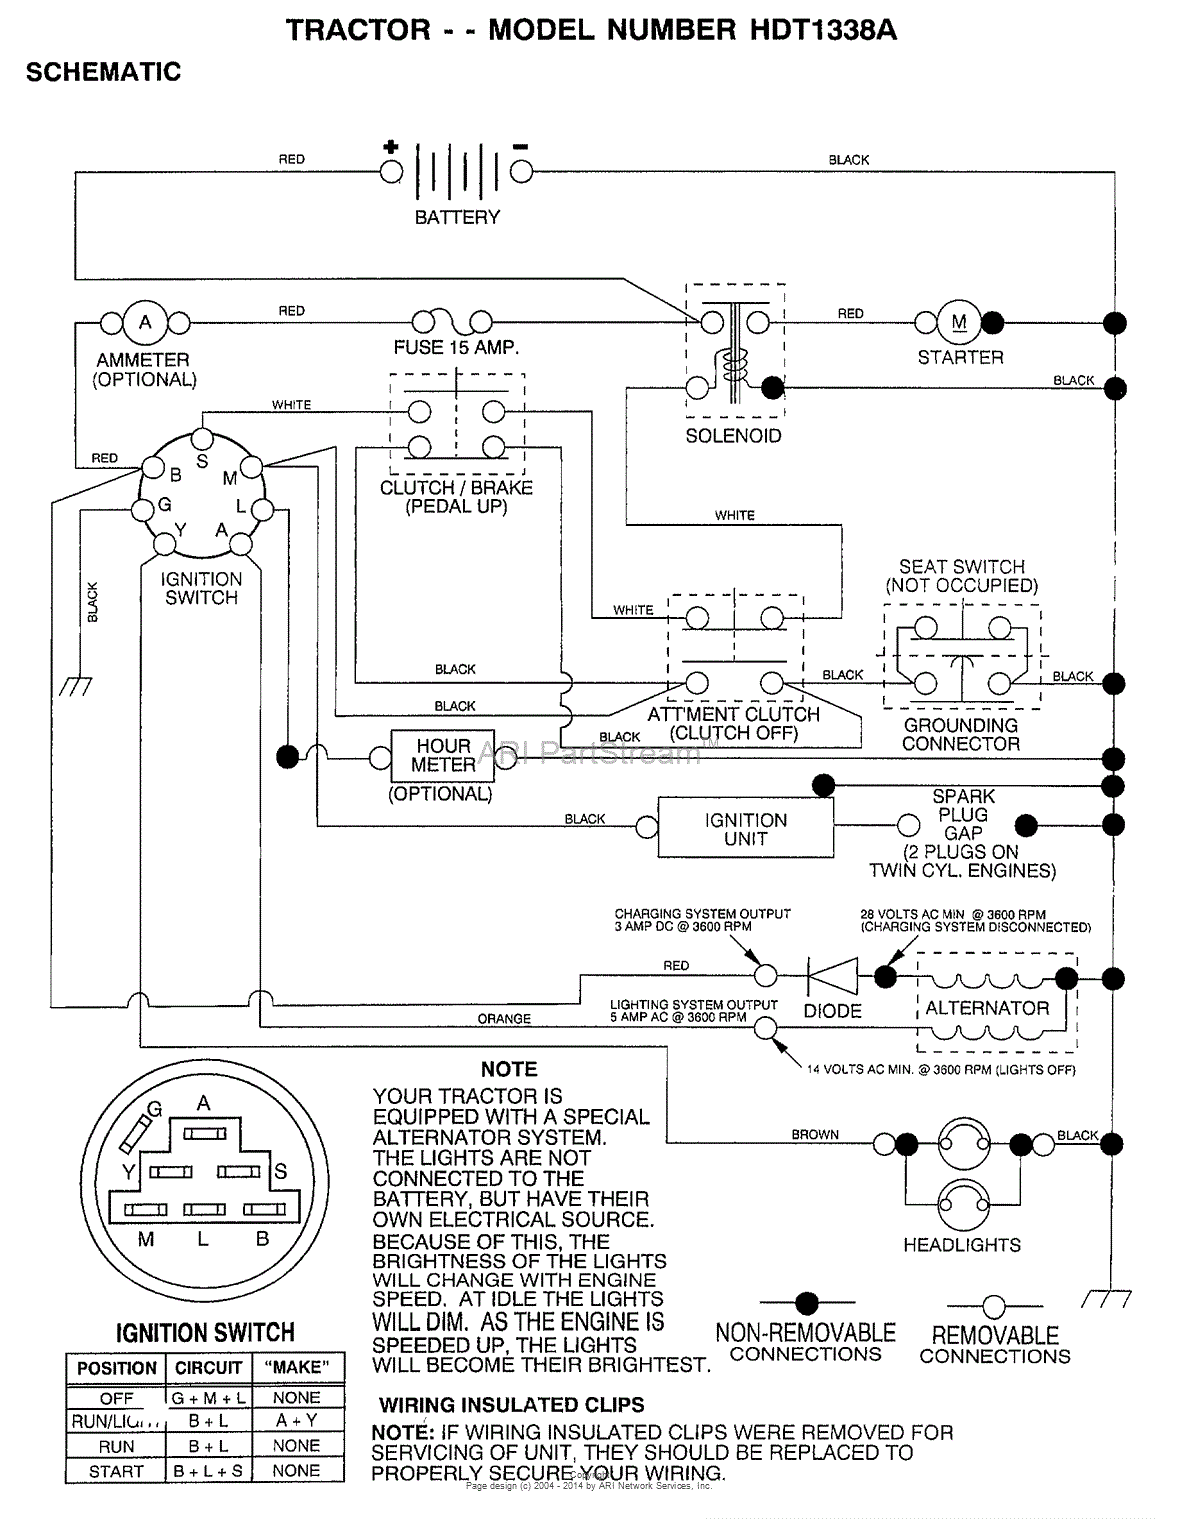 AYP/Electrolux HDT1338A (1999) Parts Diagram for SCHEMATIC